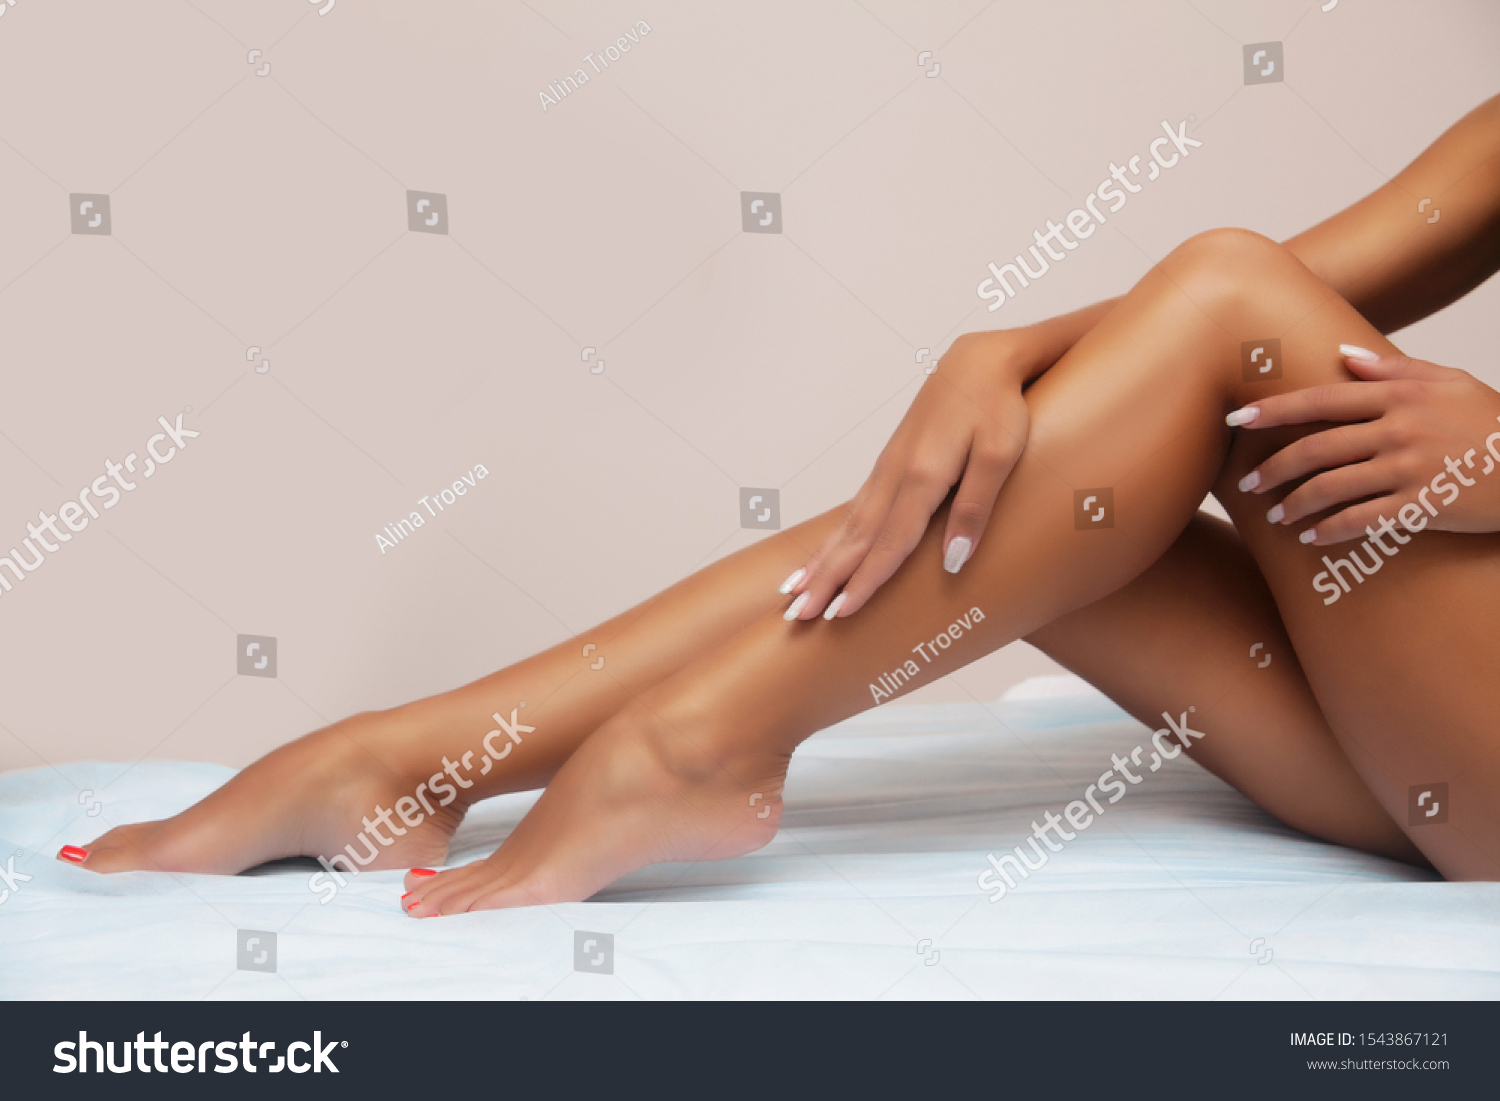 Woman body care. Close up of long female tanned legs with perfect smooth soft skin, pedicure, healthy nails on white background. Epilation, beauty and health concept
 #1543867121